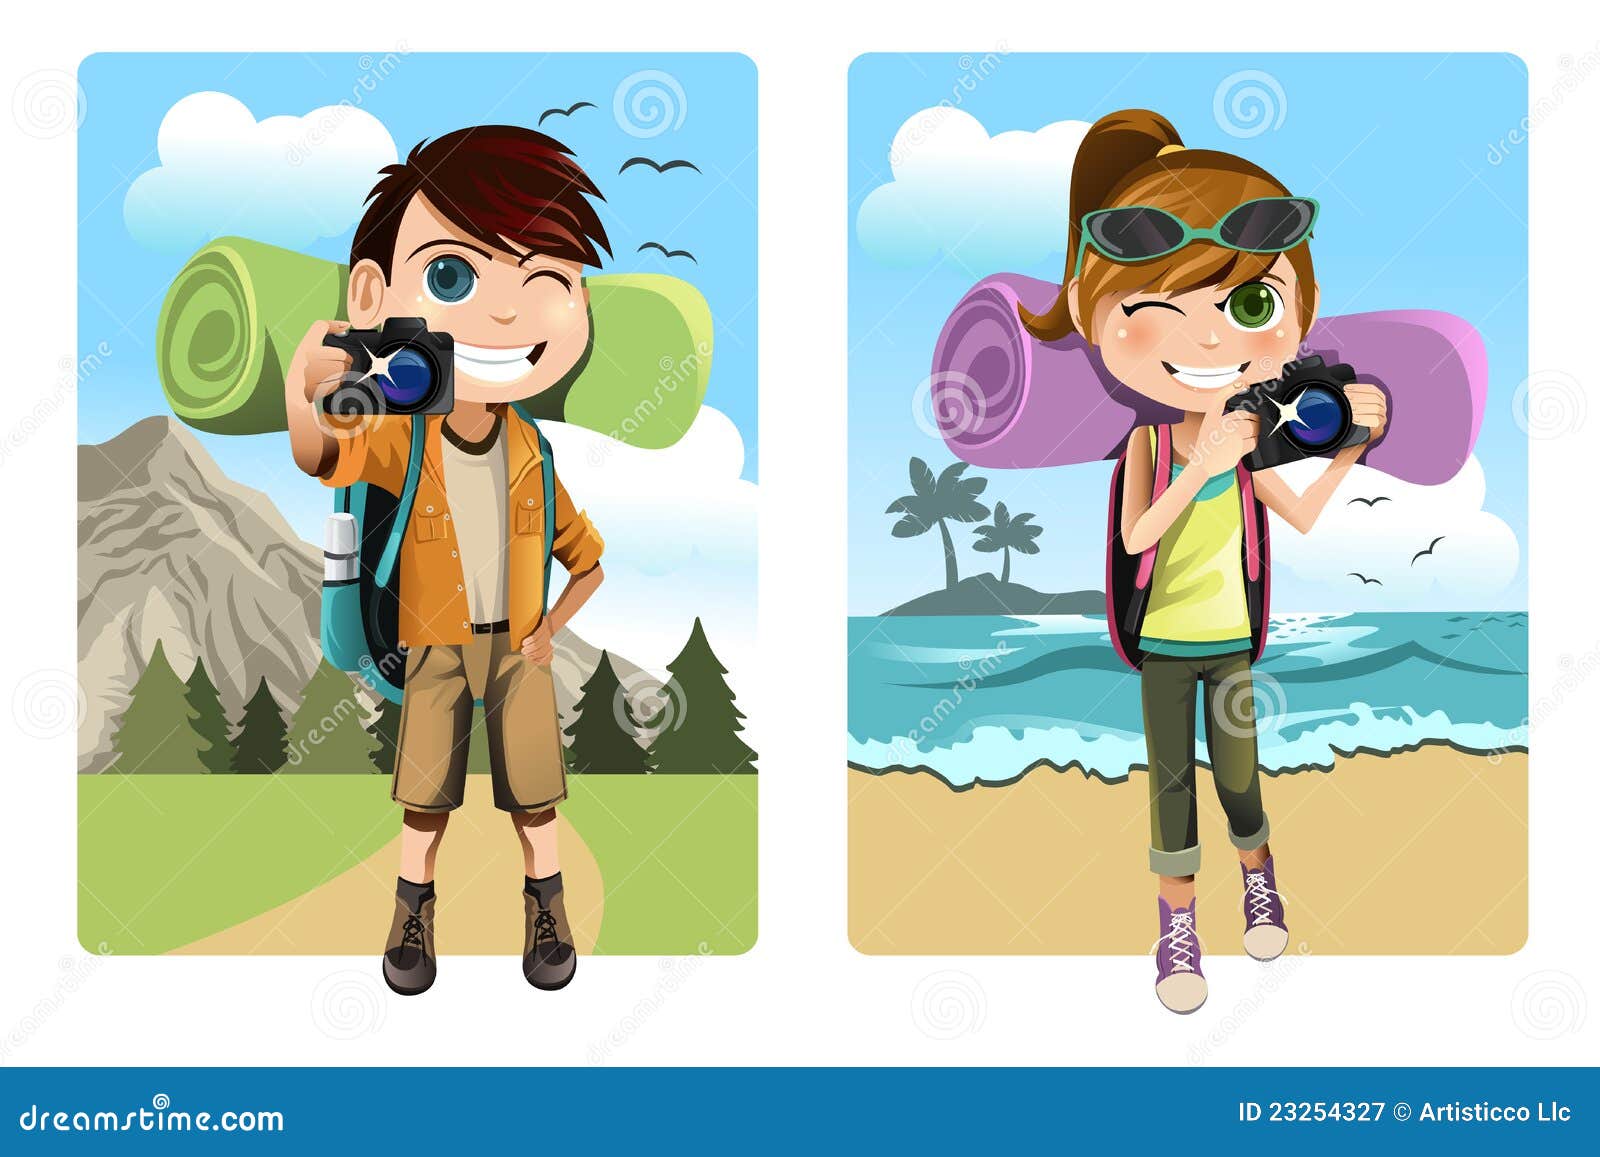 travel guide clipart - photo #42